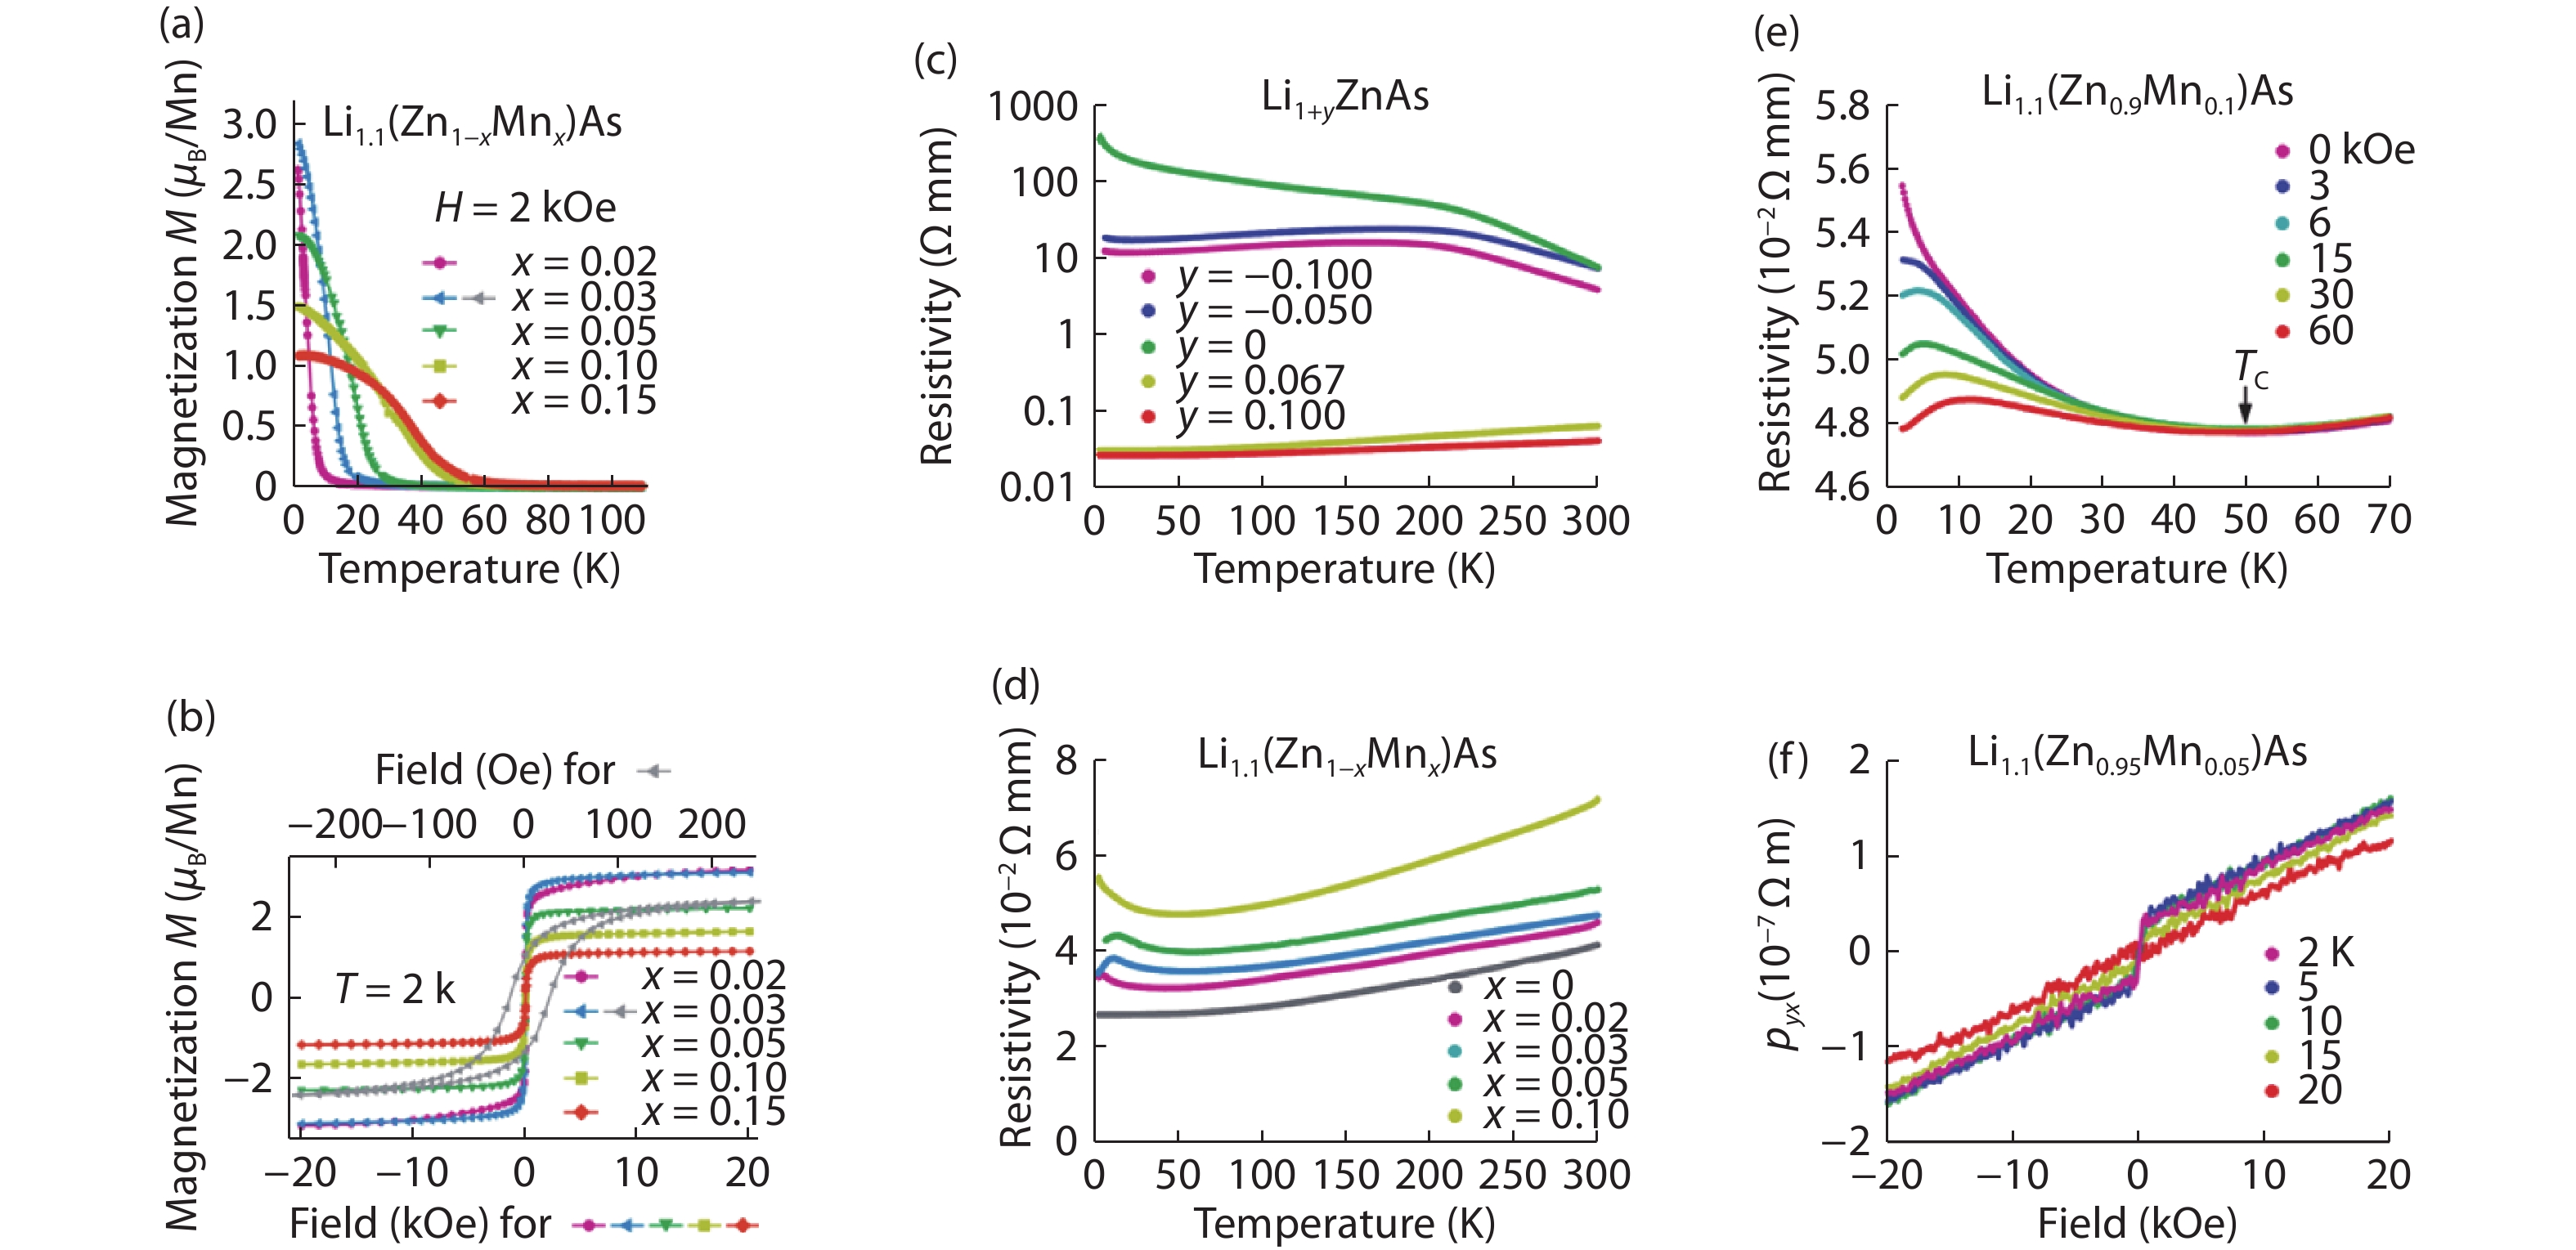 (Color online) Magnetization & transport measurements of Li(Zn,Mn)As. (a) The temperature dependence of M in H = 2 kOe (no difference in FC and ZFC procedures). (b) M at 2 K in various values of external field H from 0 to 20 kOe. The grey symbols show a hysteresis loop in x = 0.03 system plotted for smal field regions (top horizontal axis), which demonstrate a very small coercive field of 30–100 Oe. (c) Resistivity of Li1+yZnAs, showing metallic behavior of Li deficient (y y > 0) compounds. (d) Resistivity of Li 1.1(Zn1–xMnx)As, showing the effect of increasing charge scattering with increasing Mn concentration x. (e) Resistivity of Li1.1(Zn0.9Mn0.1)As in various external field H, which exhibits negative magnetoresistance below TC ~ 50 K. (f) Hall resistivity of Li1.1(Zn0.95Mn0.05)As at 2 K, which exhibits p-type carriers with concentrations of n ~1020 cm–3 together with the anomalous Hall effect due to spontaneous magnetization at H = 0. Adoped from Ref. [19].